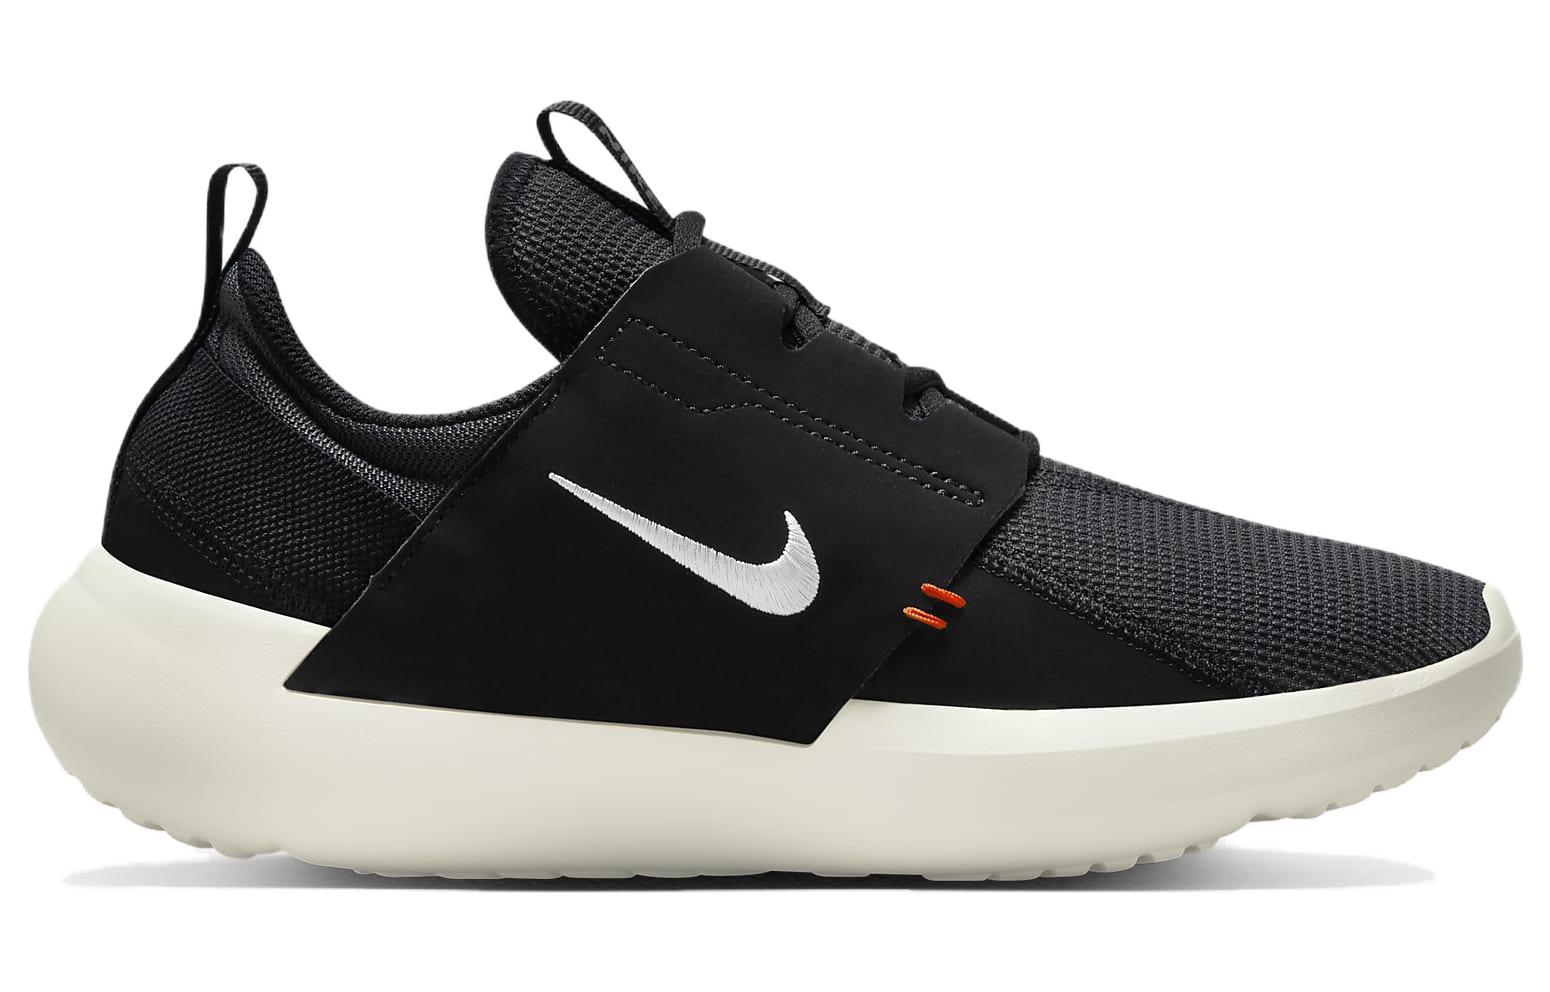 Nike E-series Ad Shoes in Black | Lyst